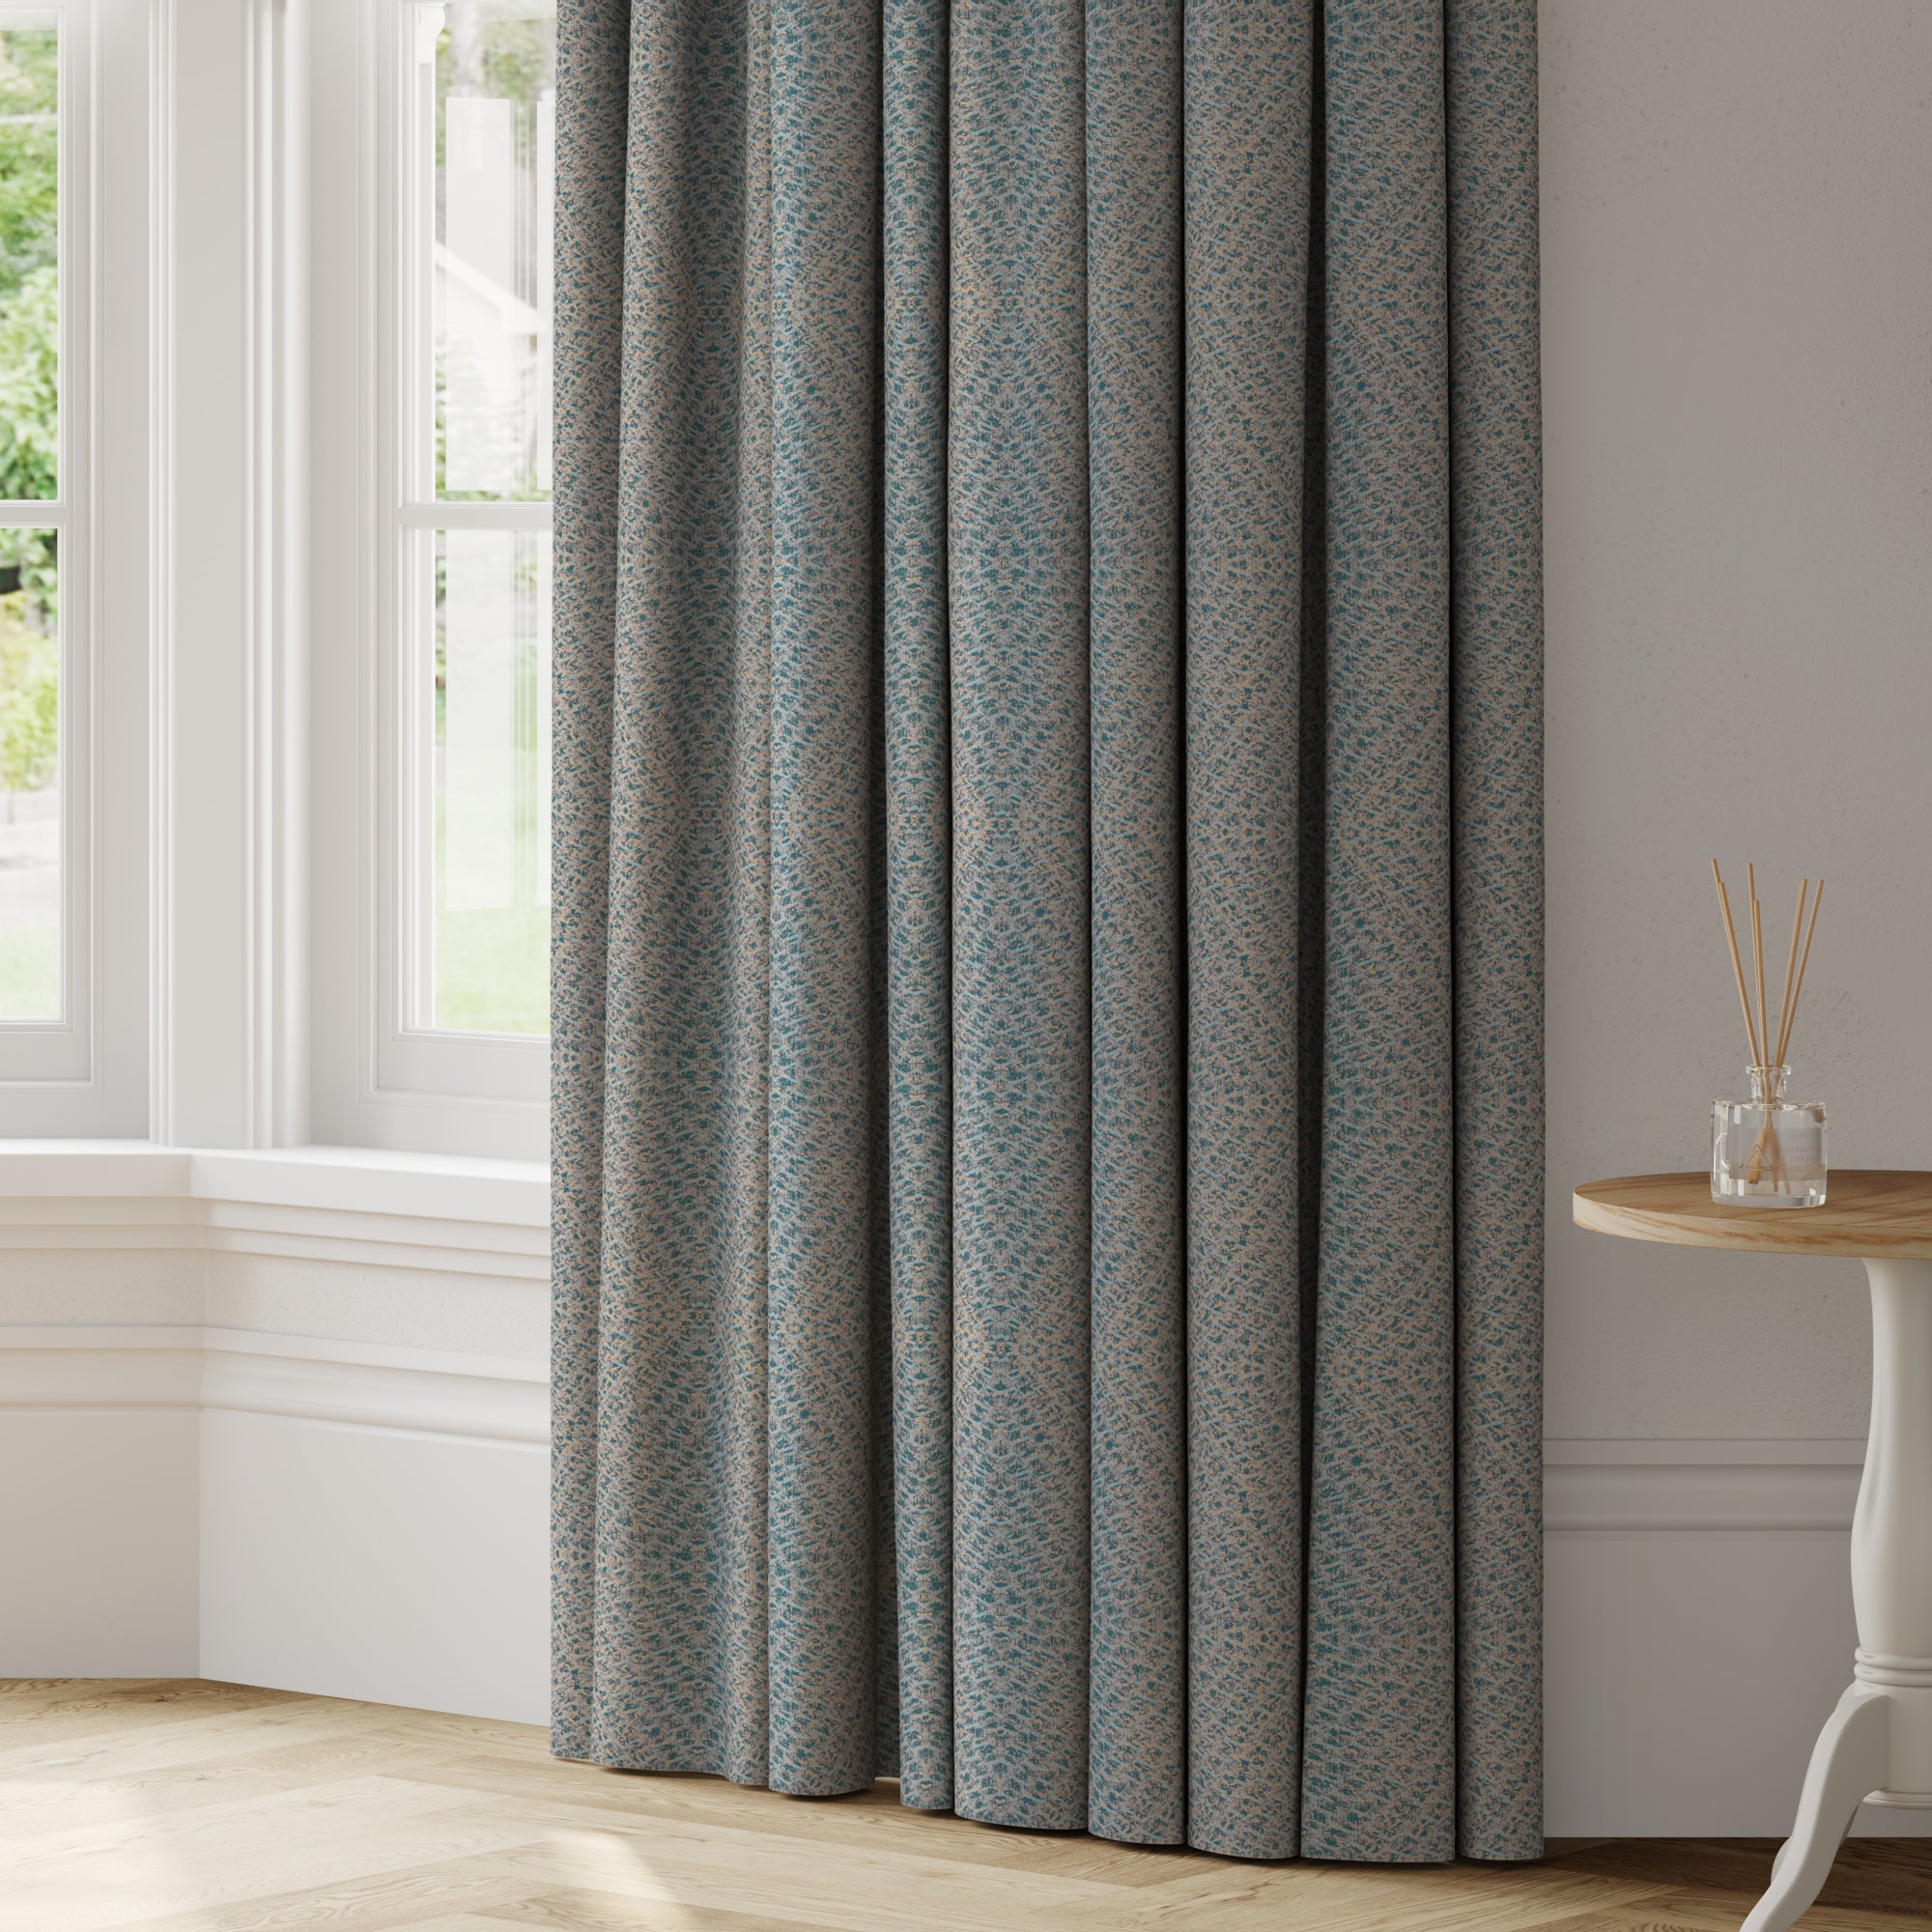 Canberra Made to Measure Curtains